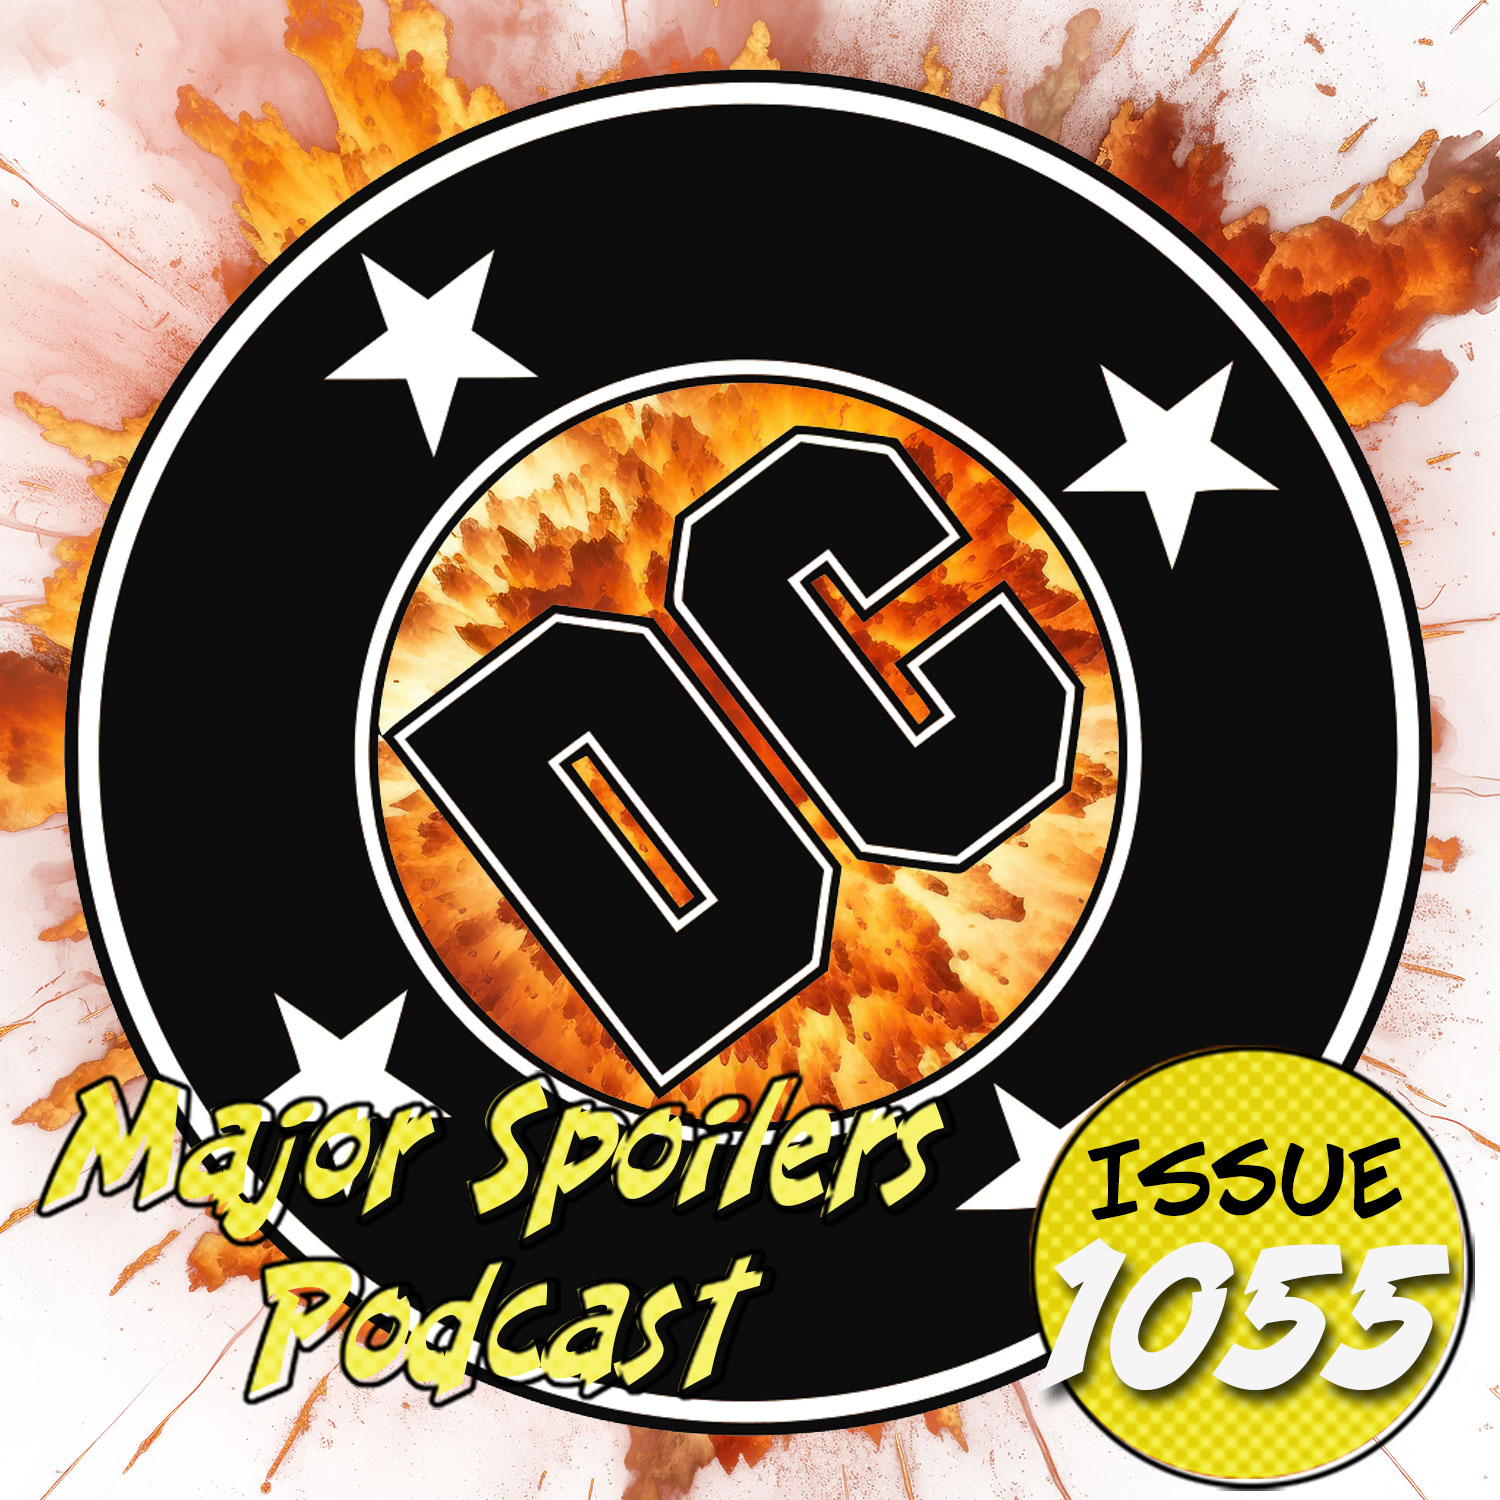 Major Spoilers Podcast #1055: The DC Implosion - The Implosion (Part 2)